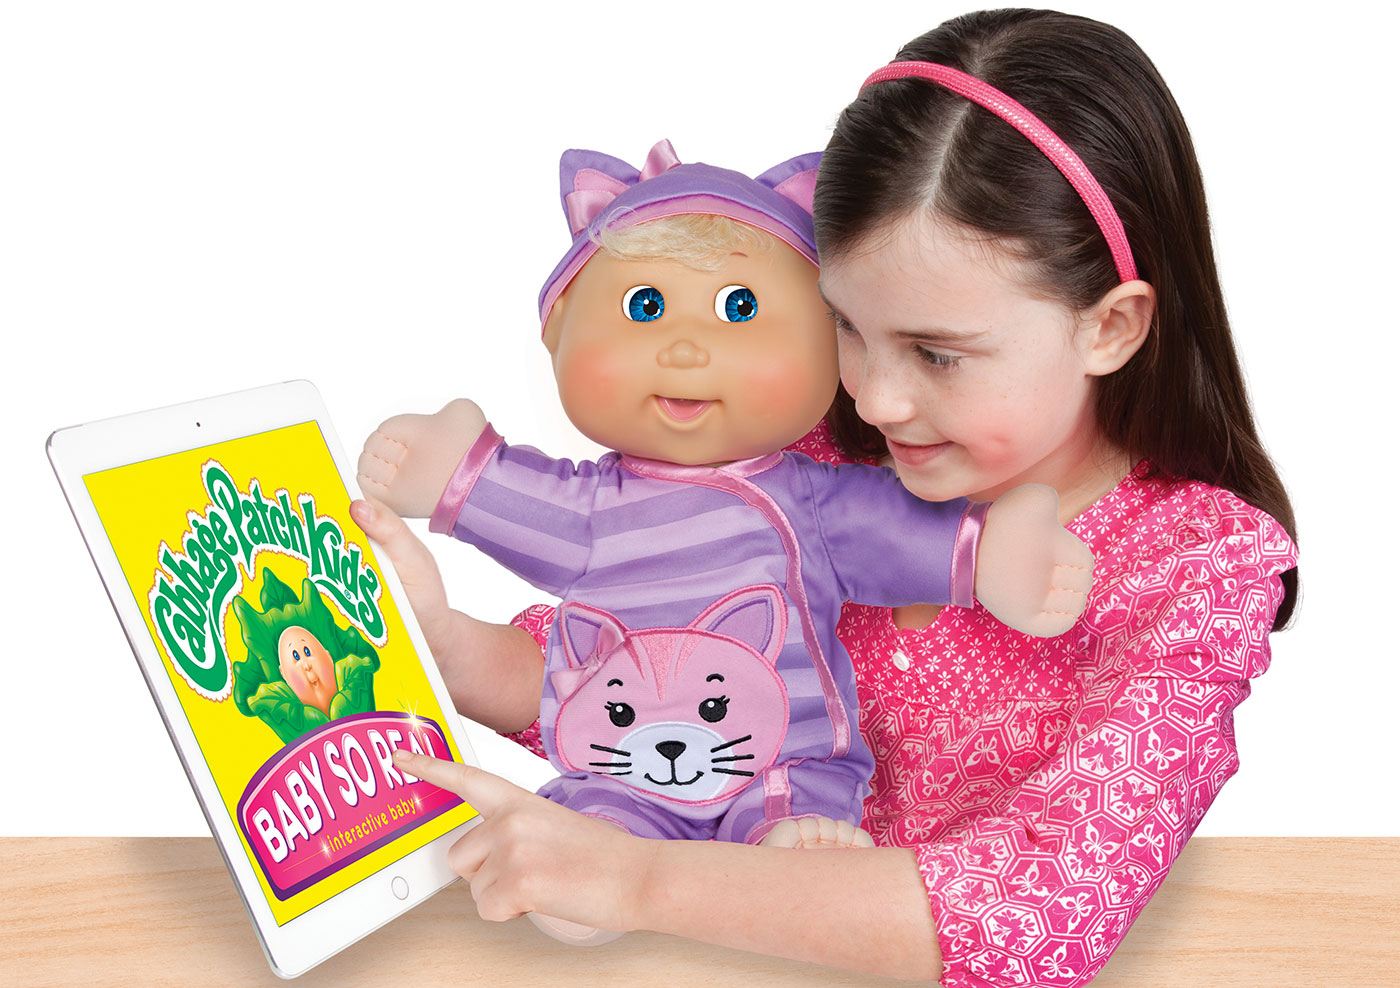 2018 holiday edition cabbage patch doll